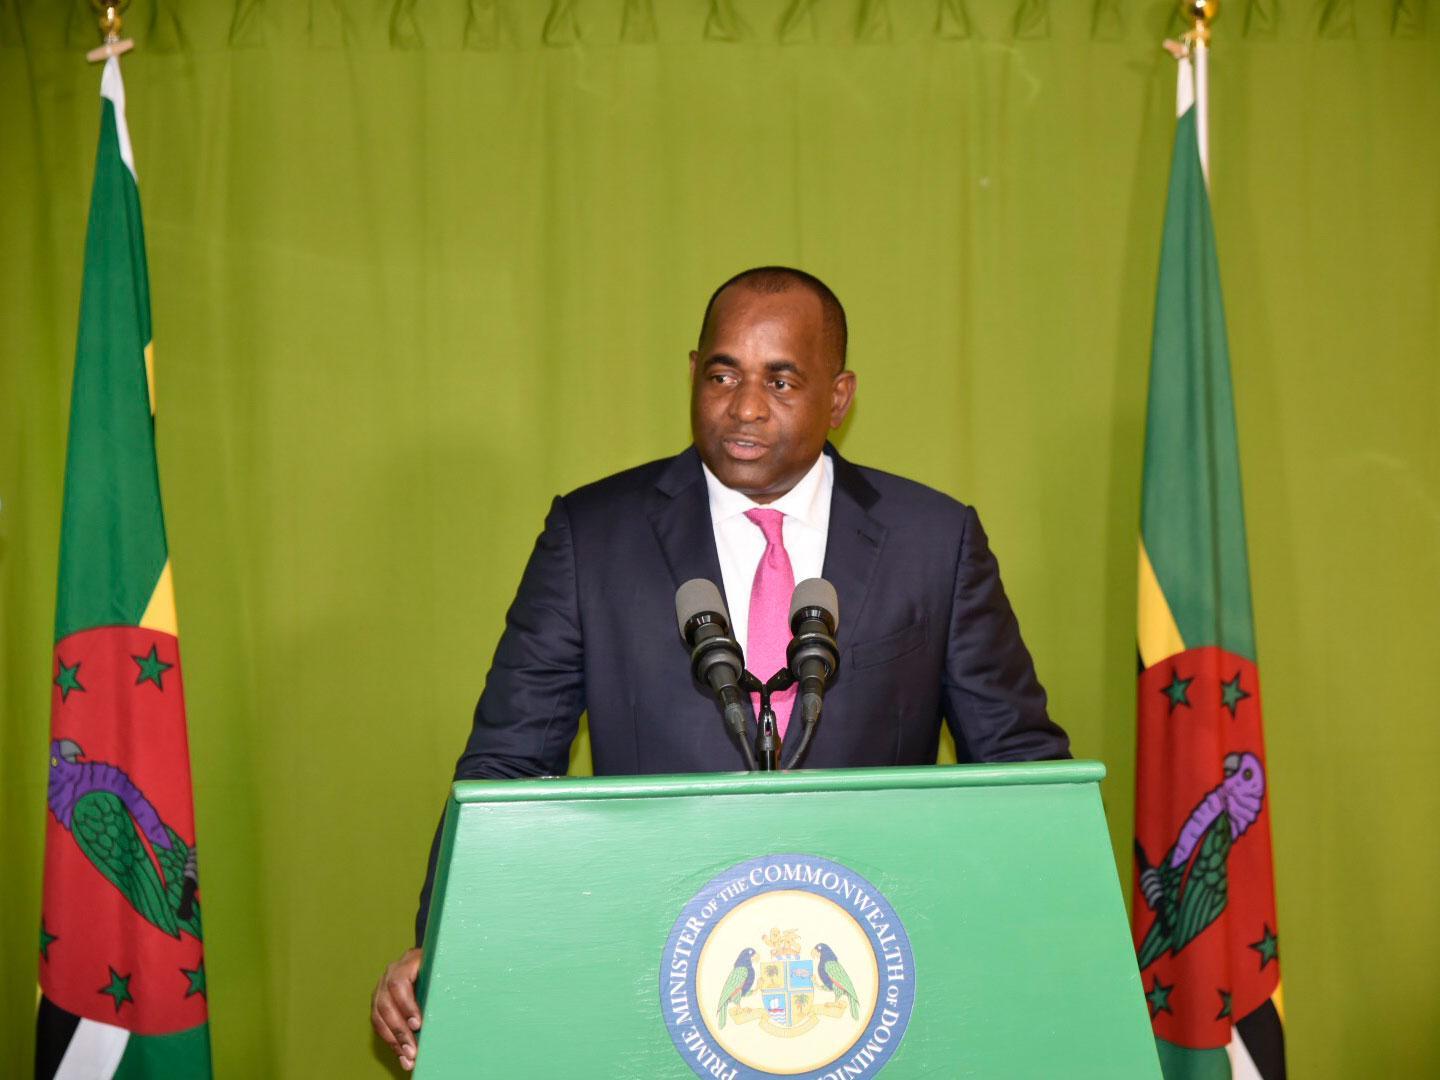 Dominica's Prime Minister, Roosevelt Skerrit, described his experience of the hurricane on Facebook